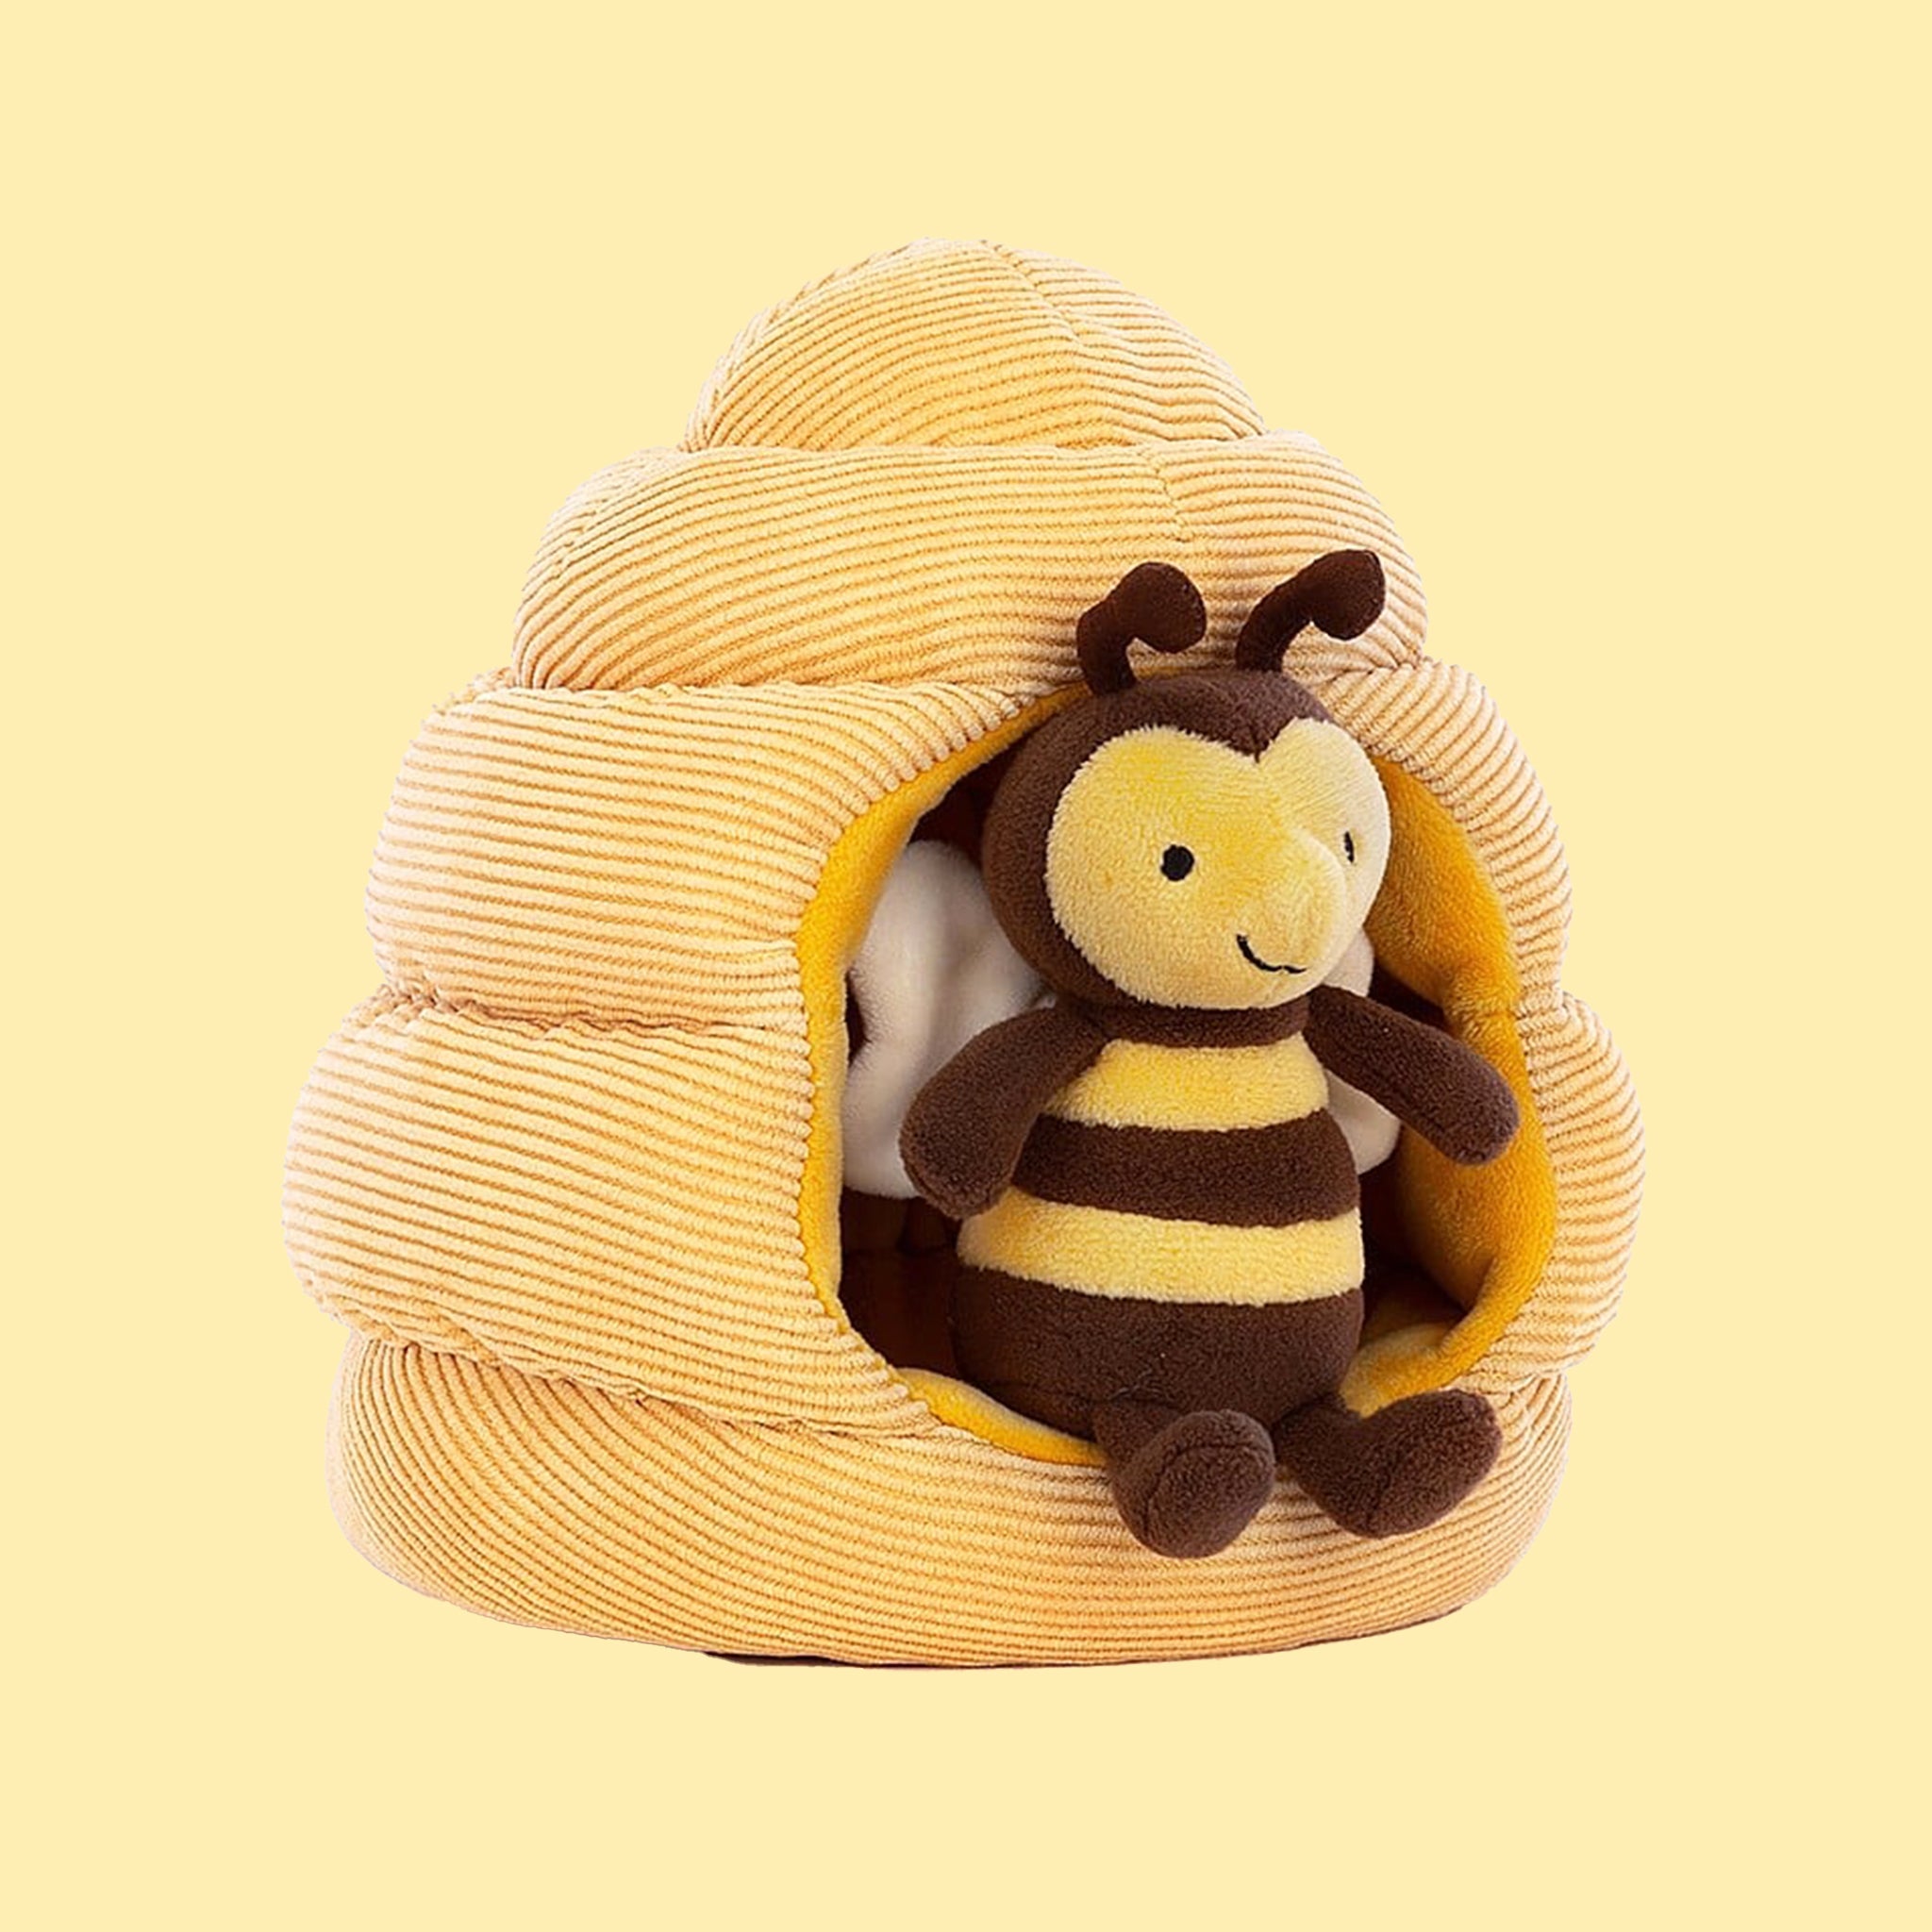 A bee shaped stuffed toy along with a honeybee hive shaped toy. 